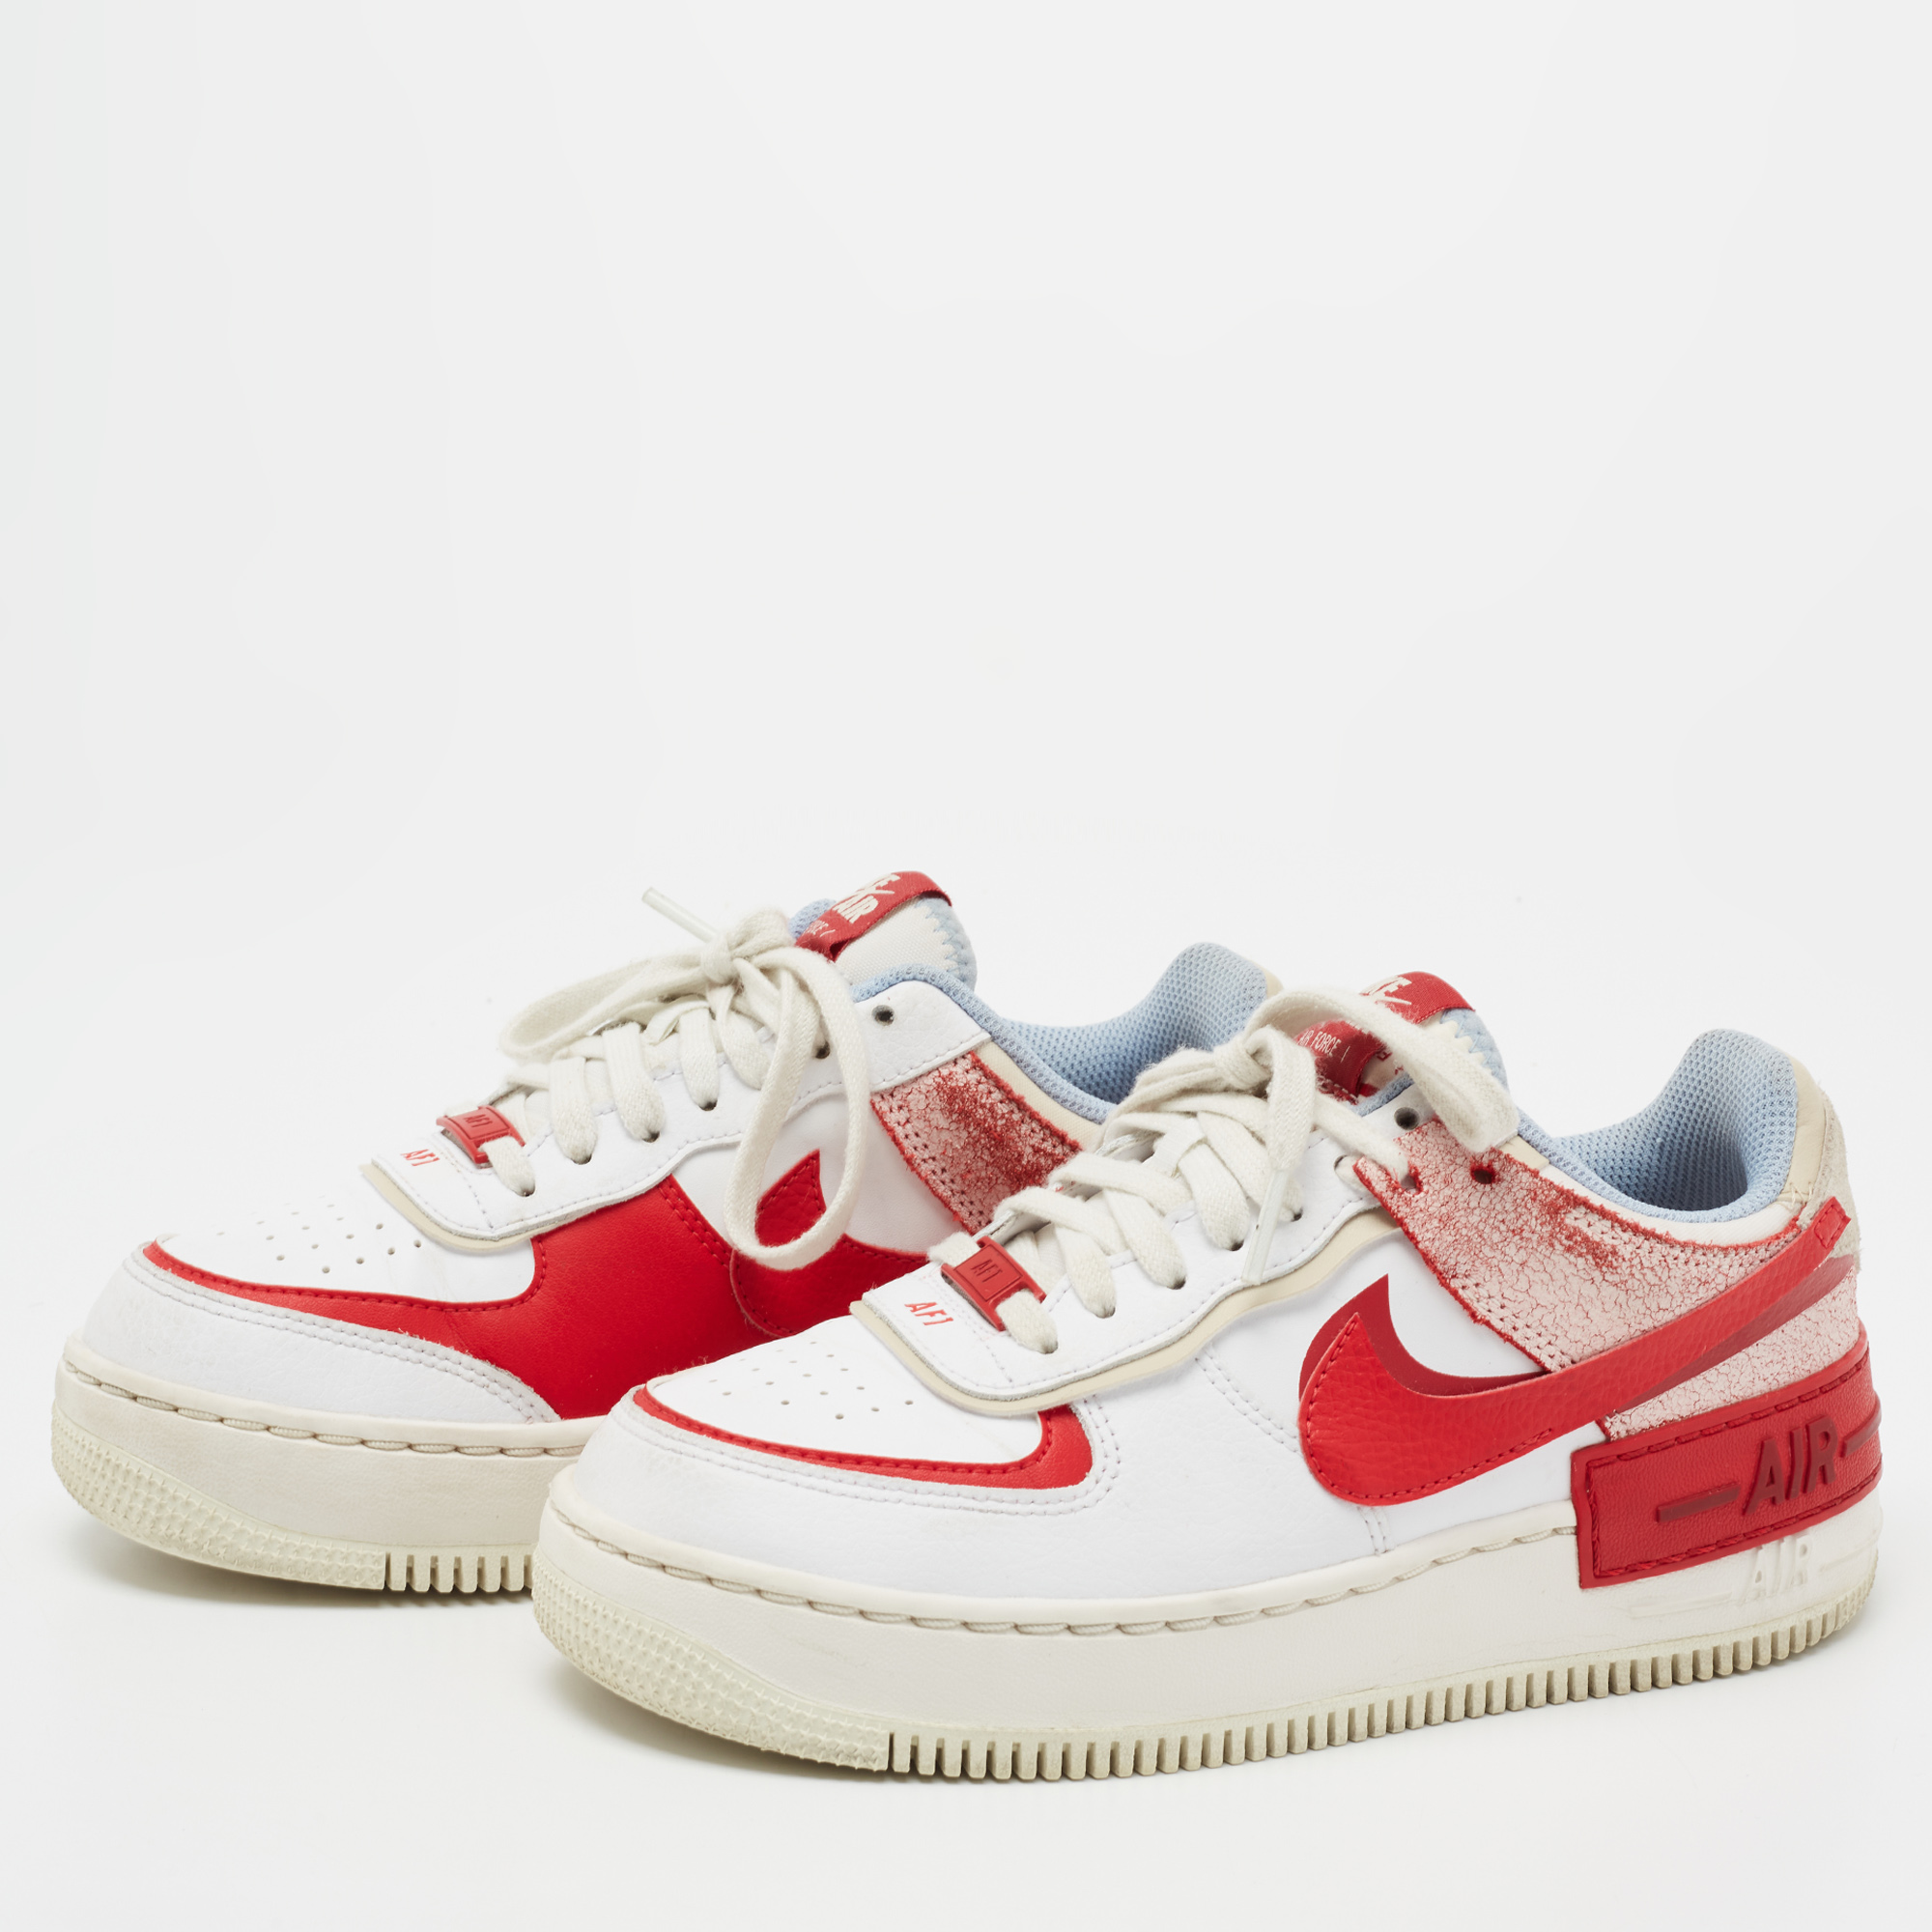 

Nike Red/White Leather and Suede Air Force 1 Shadow Cracked Low-Top Sneakers Size